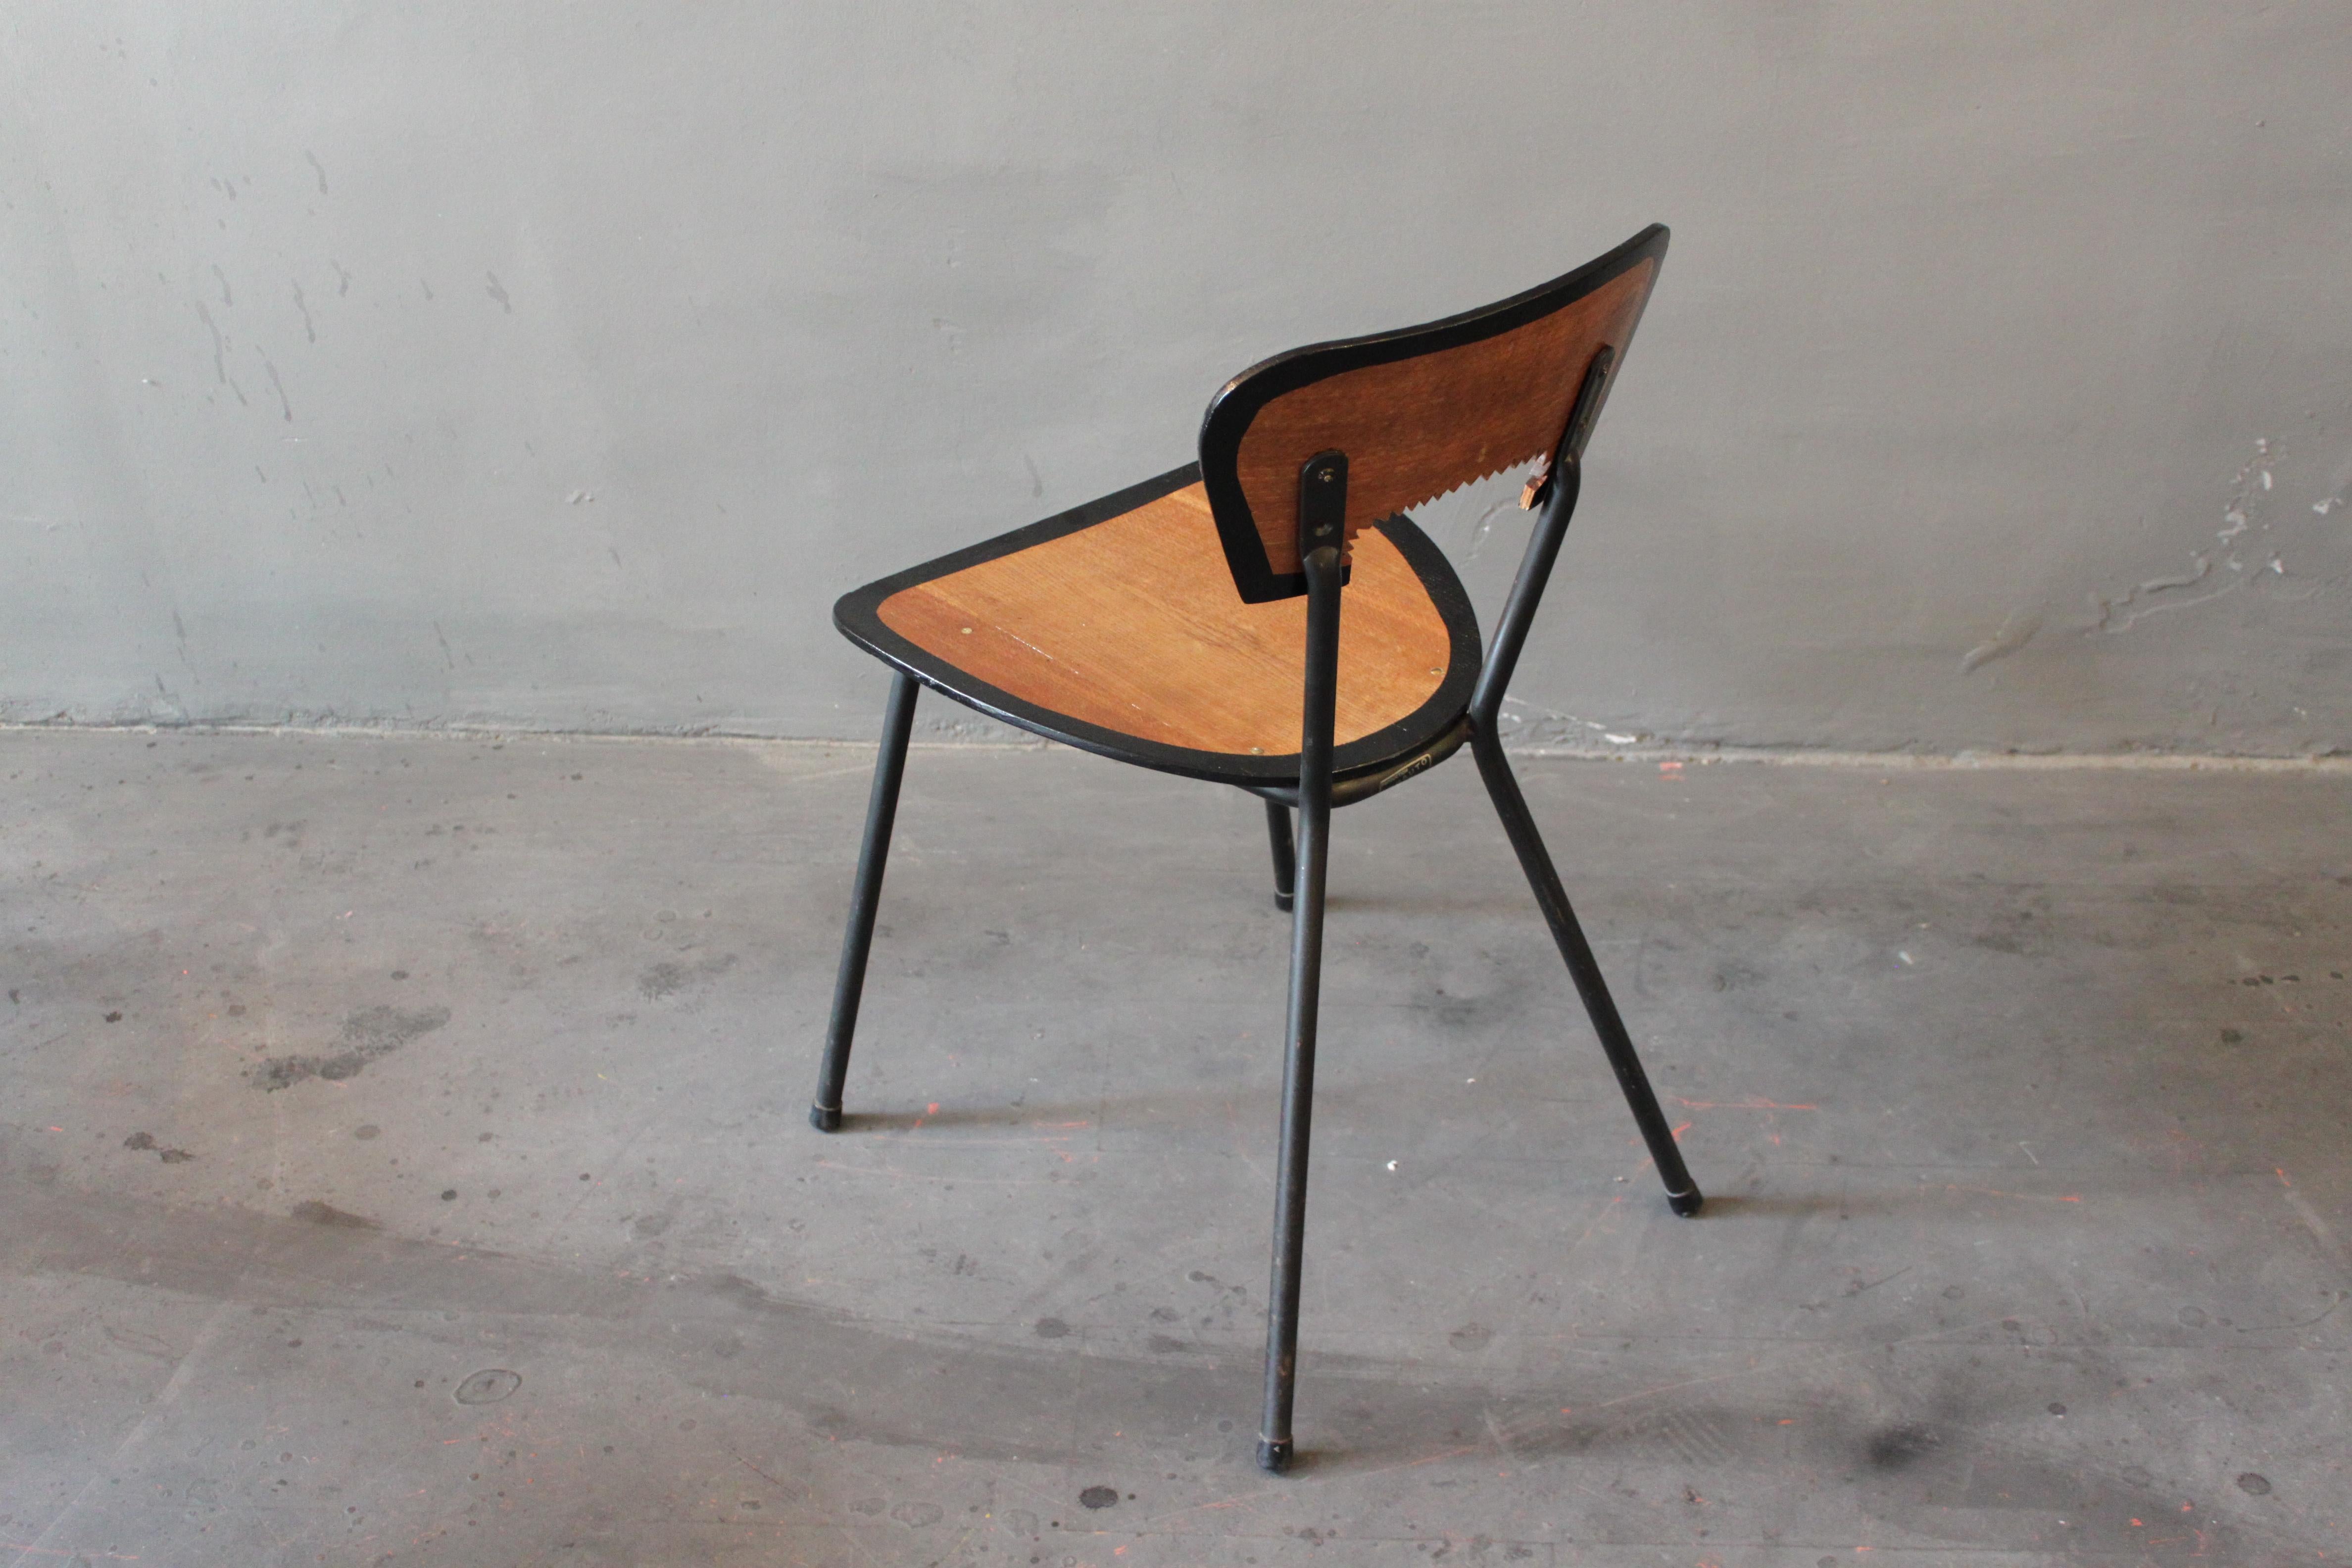 Steel 6 Dining Chairs by Jaques Hitier, contemporized by Atelier Staab